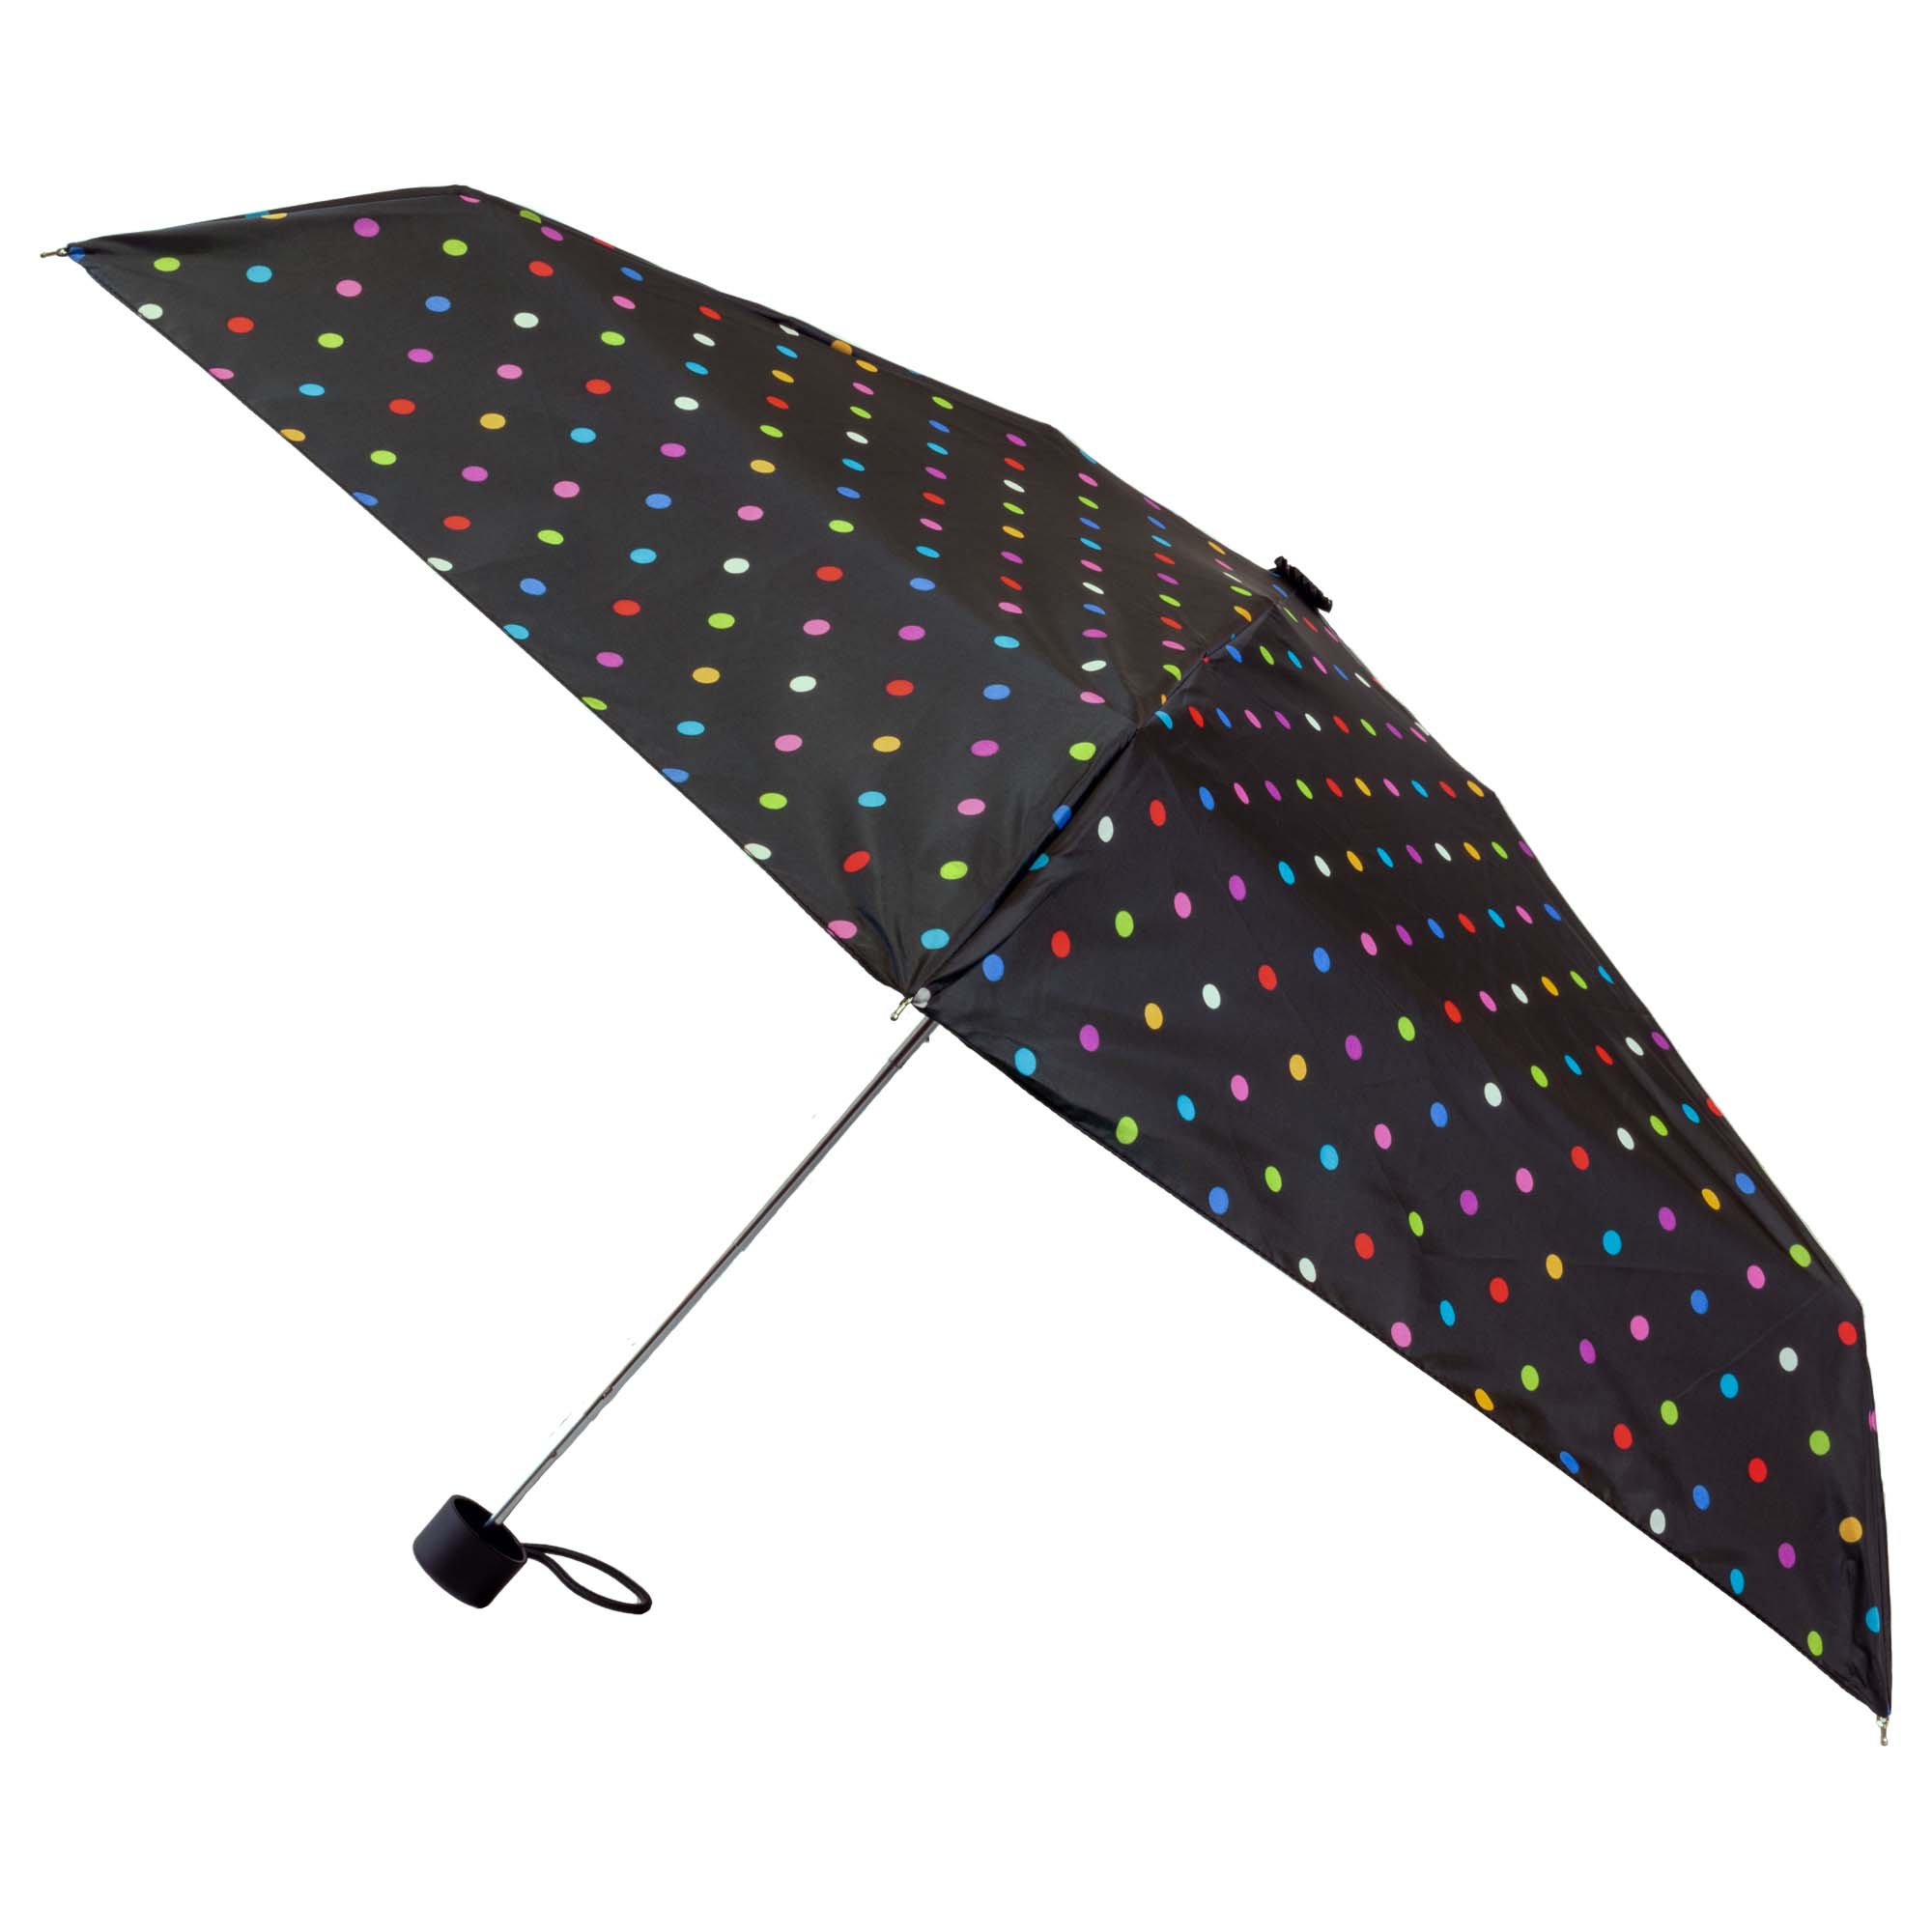 29 Space-Saving Travel Umbrellas on Deal - Shop Now and Save!